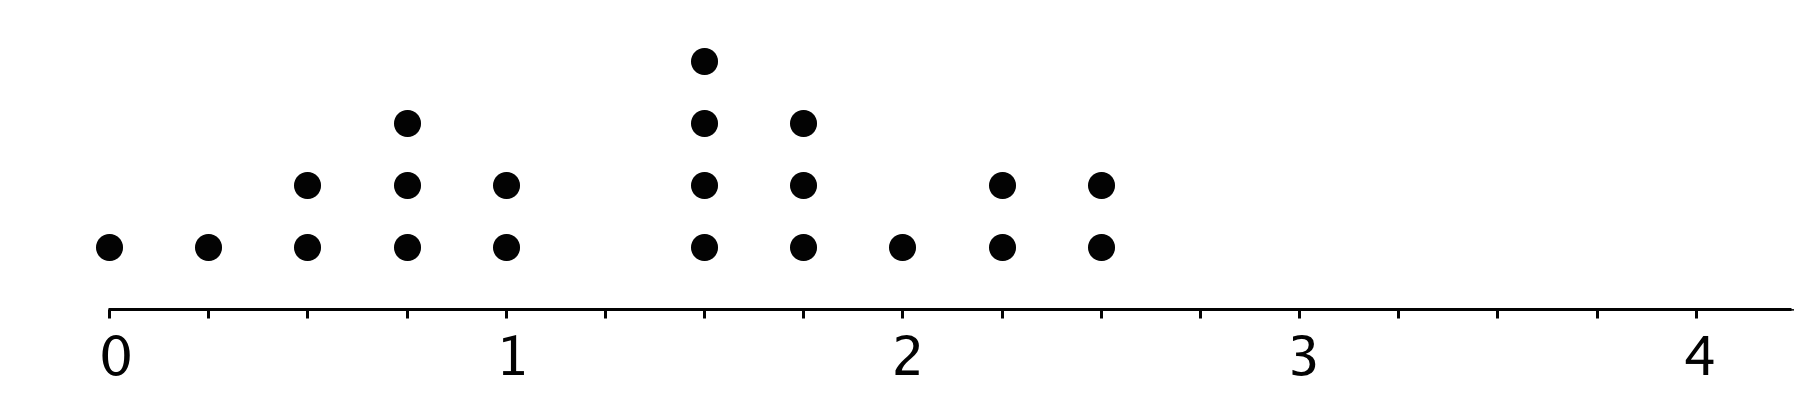 A dot plot with the numbers 0 through 4 indicated. There are 3 evenly spaced tick marks between each number. The data are as follows: 0, 1 dot. One-fourth, 1 dot. One-half, 2 dots. Three-fourths, 3 dots. 1, 2 dots. 1 and a half, 4 dots. 1 and three-fourths, 3 dots. 2, 1 dot. 2 and one-fourth, 2 dots. 2 and a half, 2 dots.